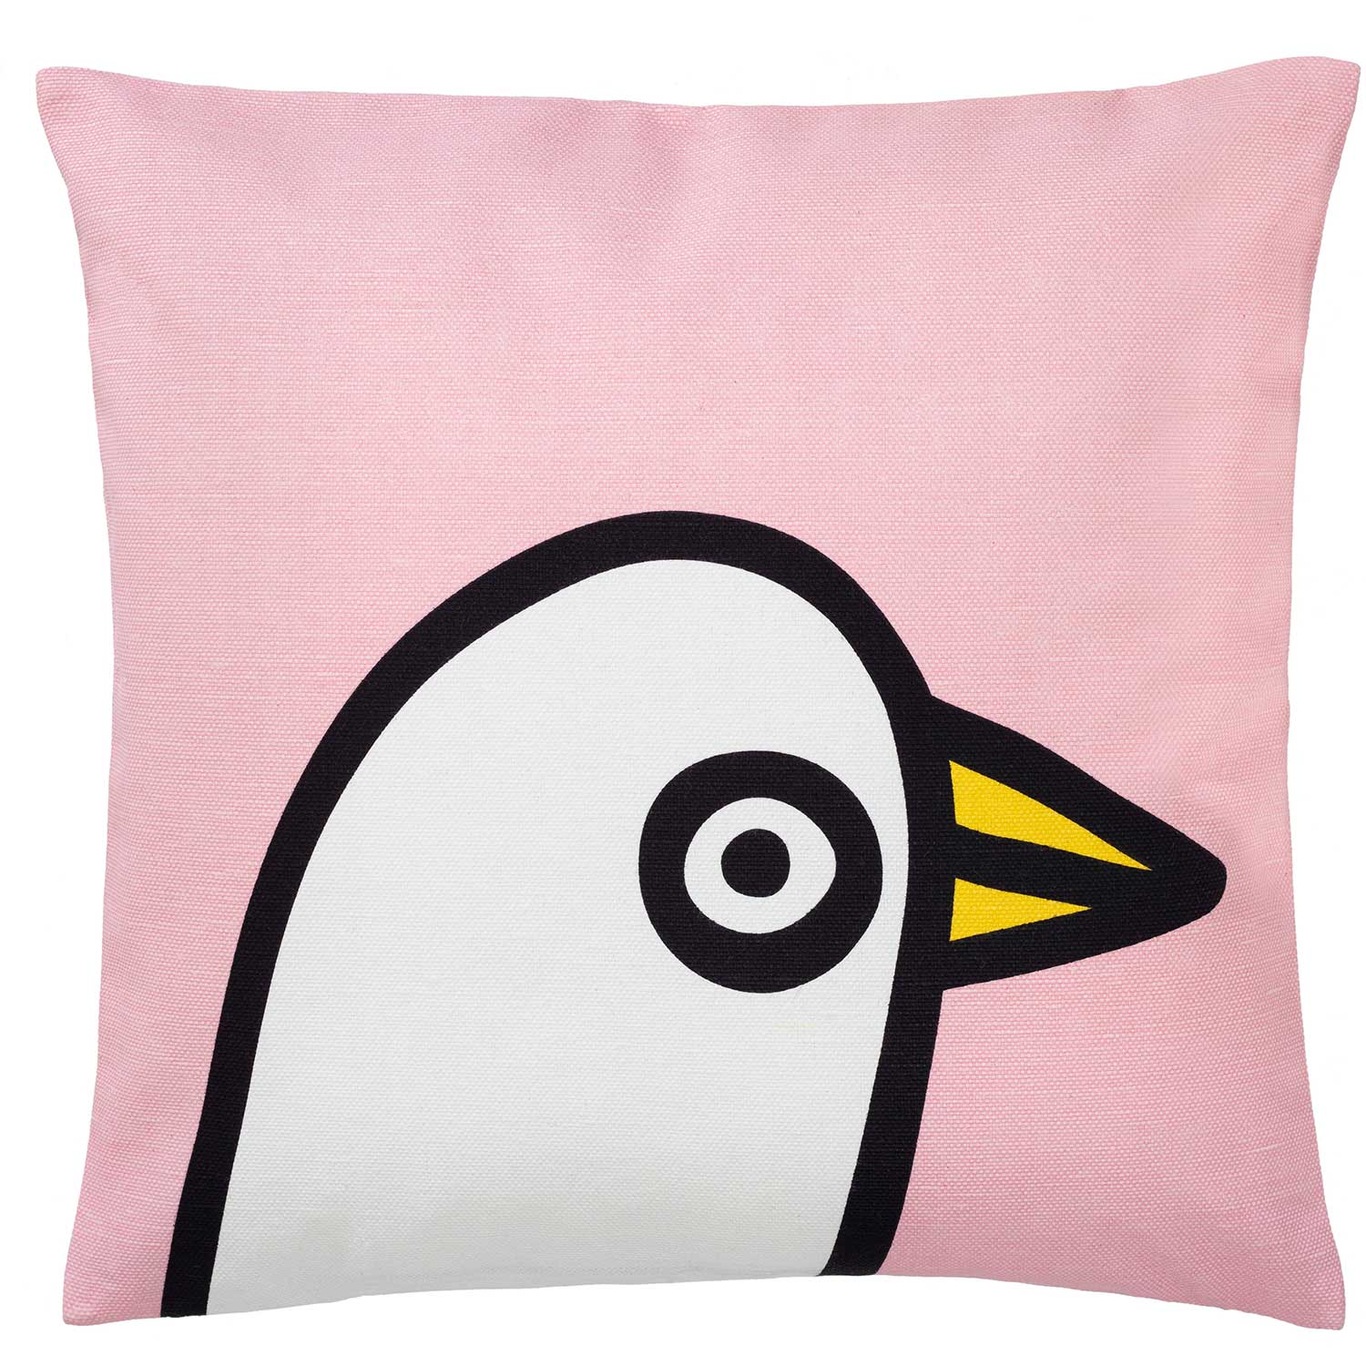 Oiva Toikka Collection Cushion Cover 47x47 cm, Birdie Pink